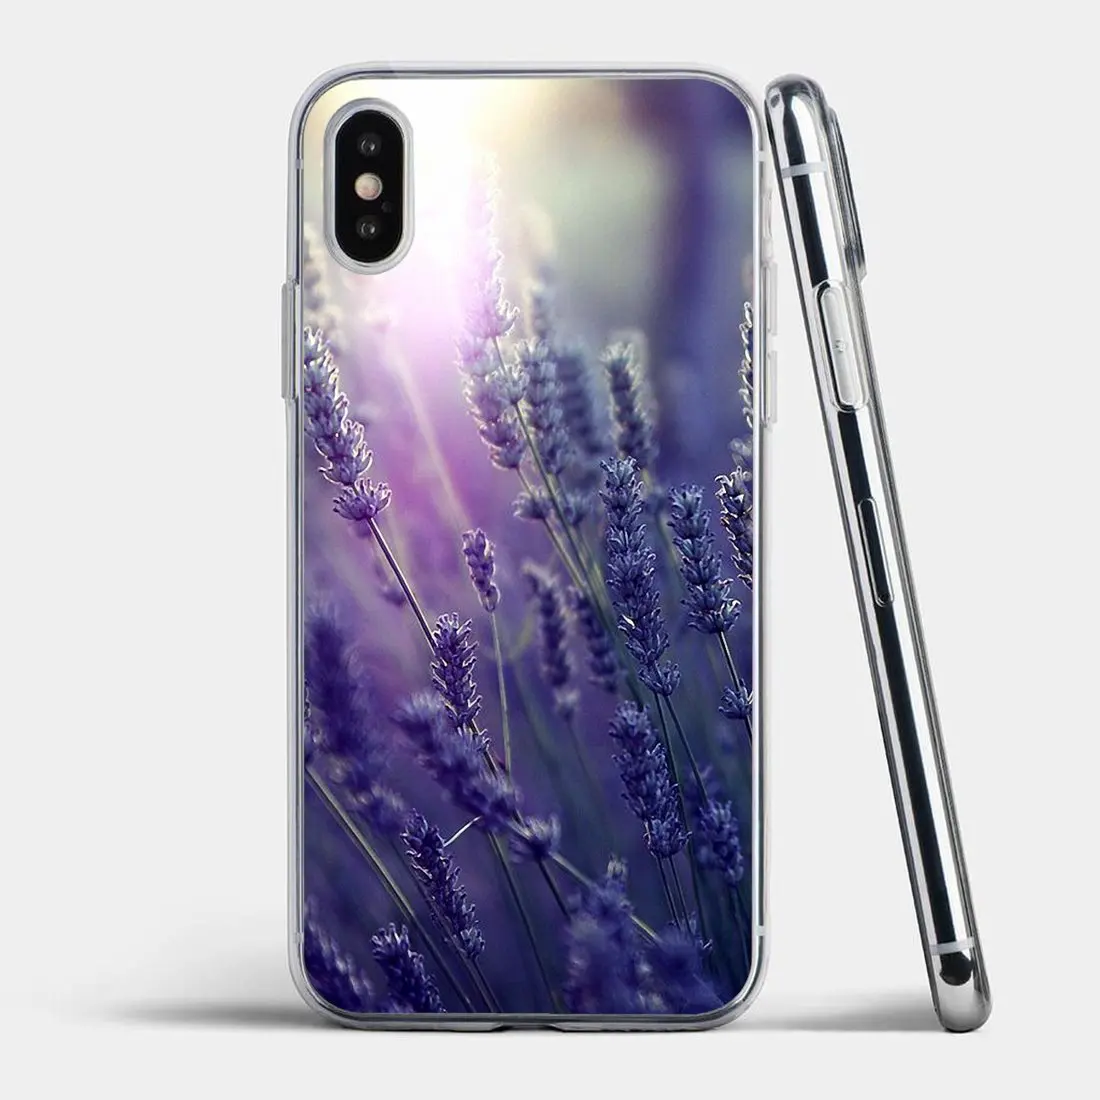 Watercolor Painting Lavender Art Transparent Soft Cases Covers For Xiaomi Redmi 3 3S 4X Note 3 4 5A 5 6 7 8 Pro Pocophone F1 images - 6